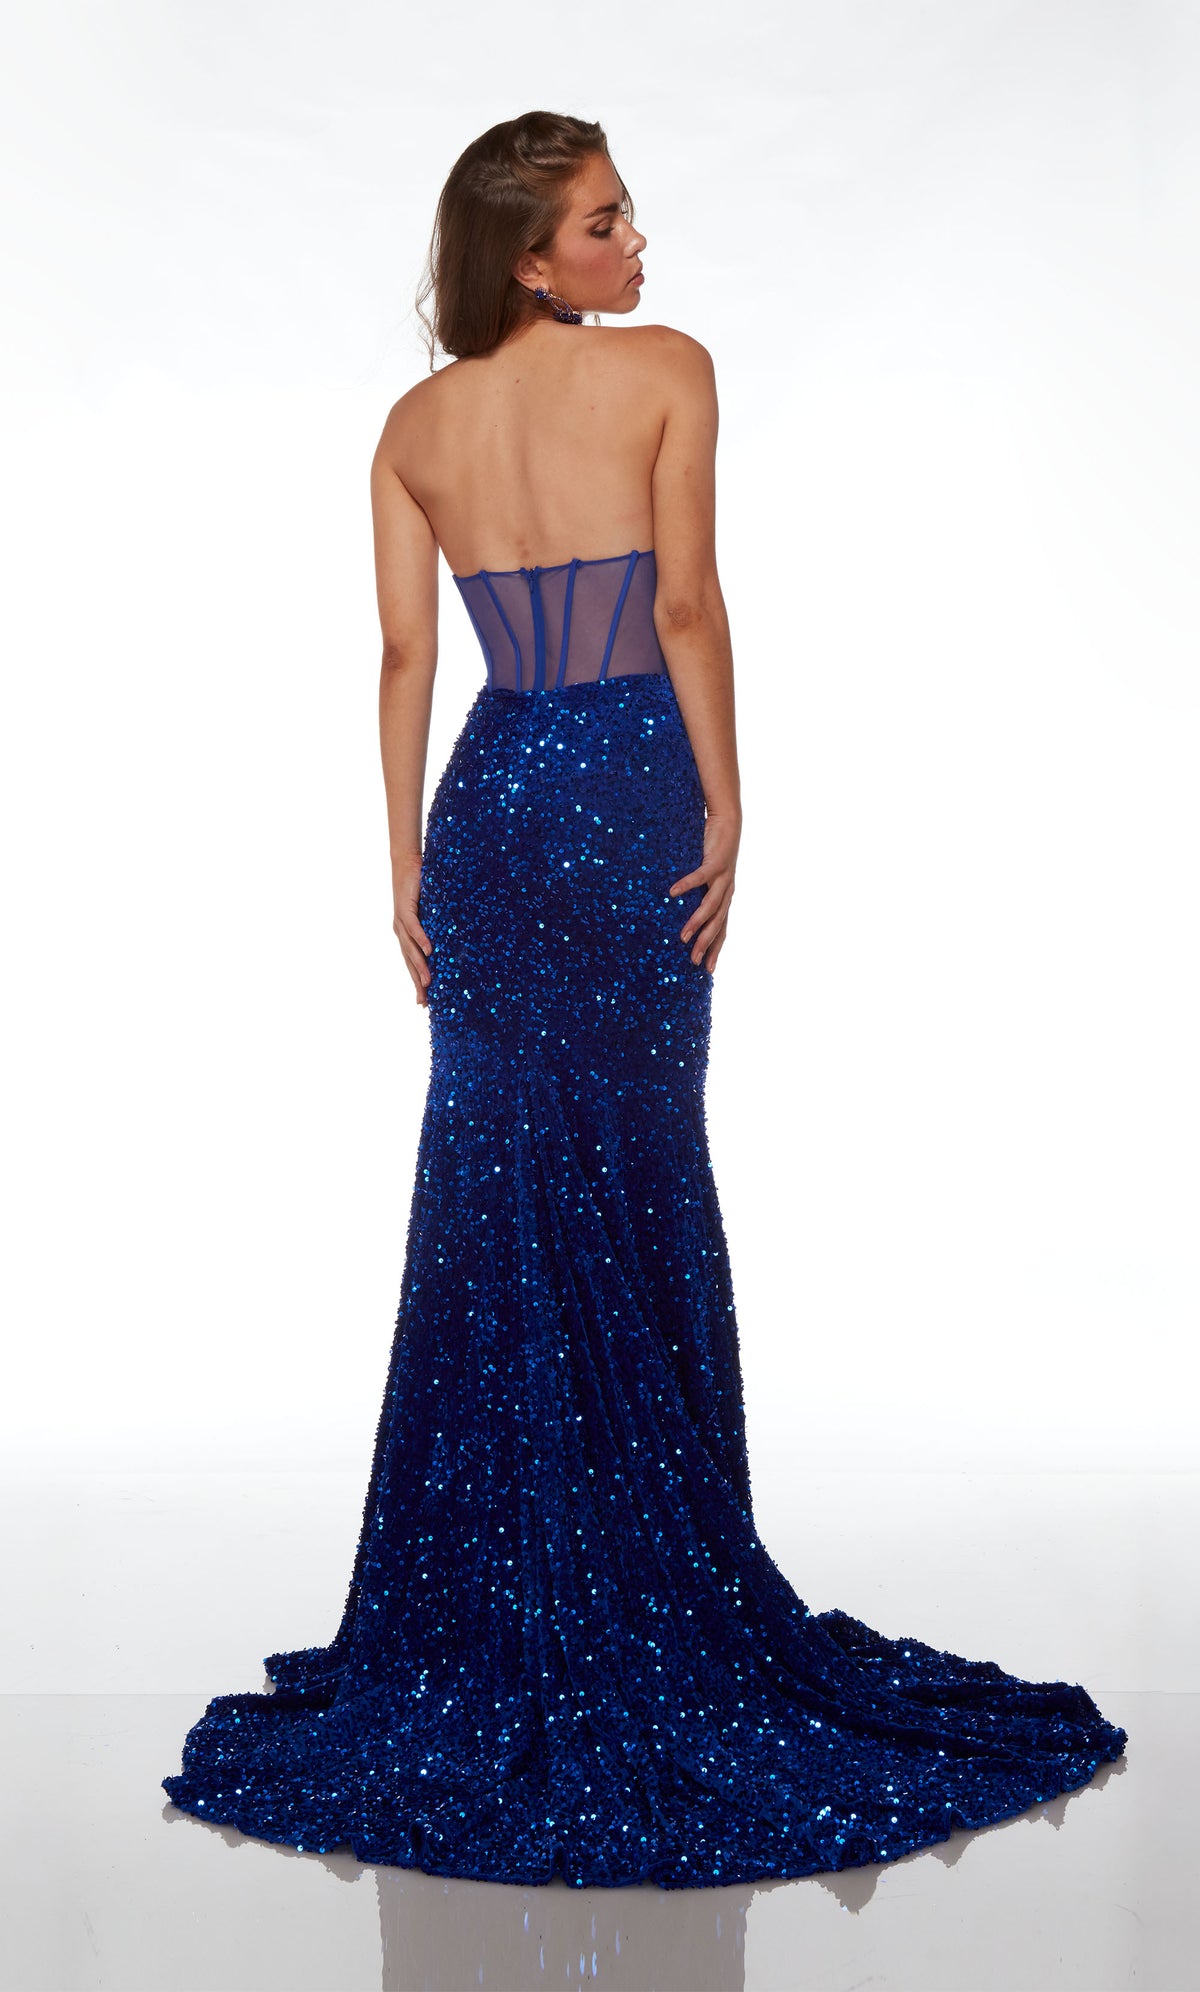 Chic royal blue sequin gown: strapless sweetheart neckline, sheer corset, fit-and-flare skirt, long train, exuding glamour and sophistication.